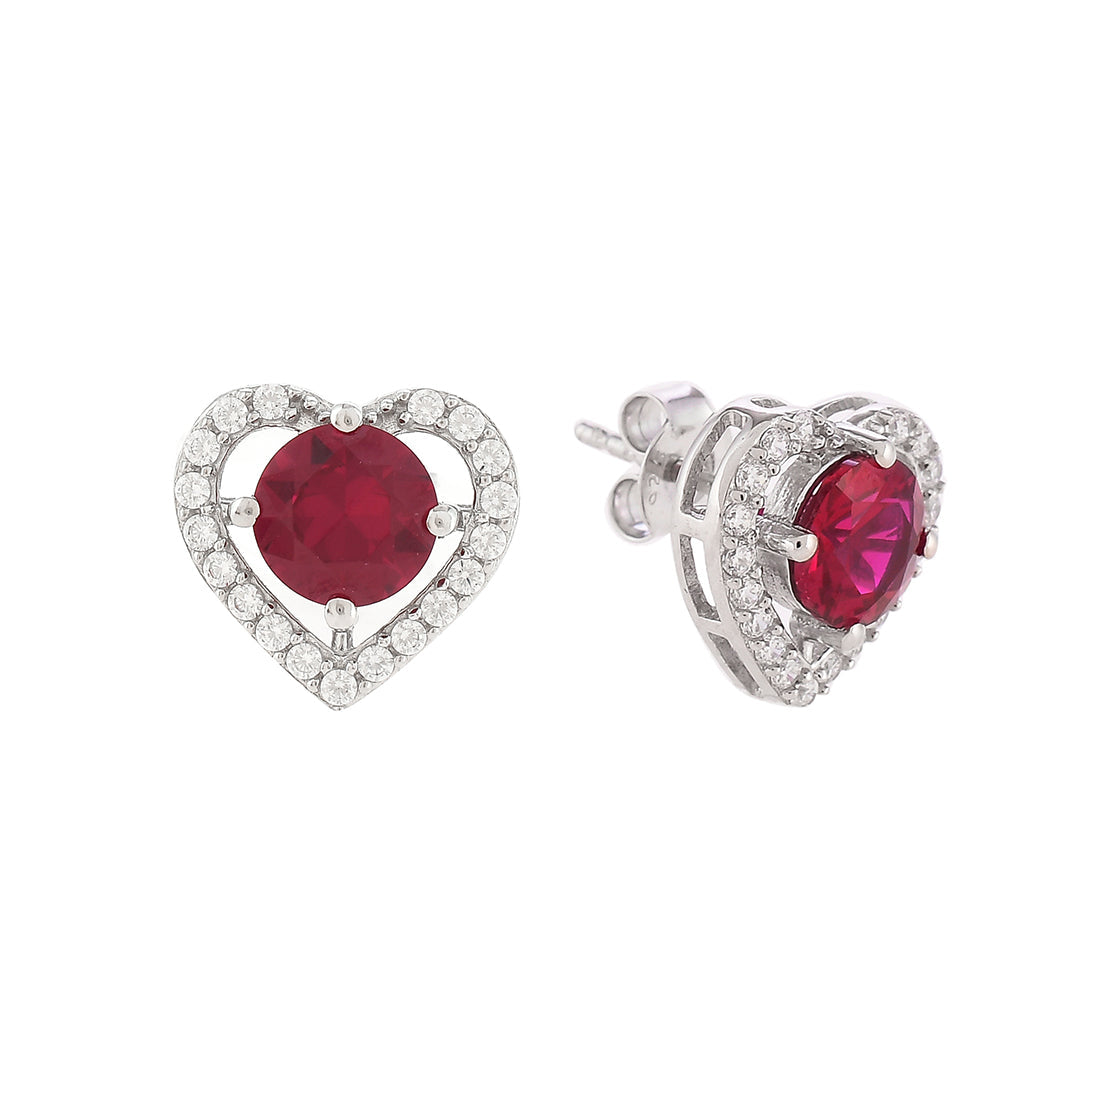 Women's Red And Silver Cz Heart Earrings - Voylla